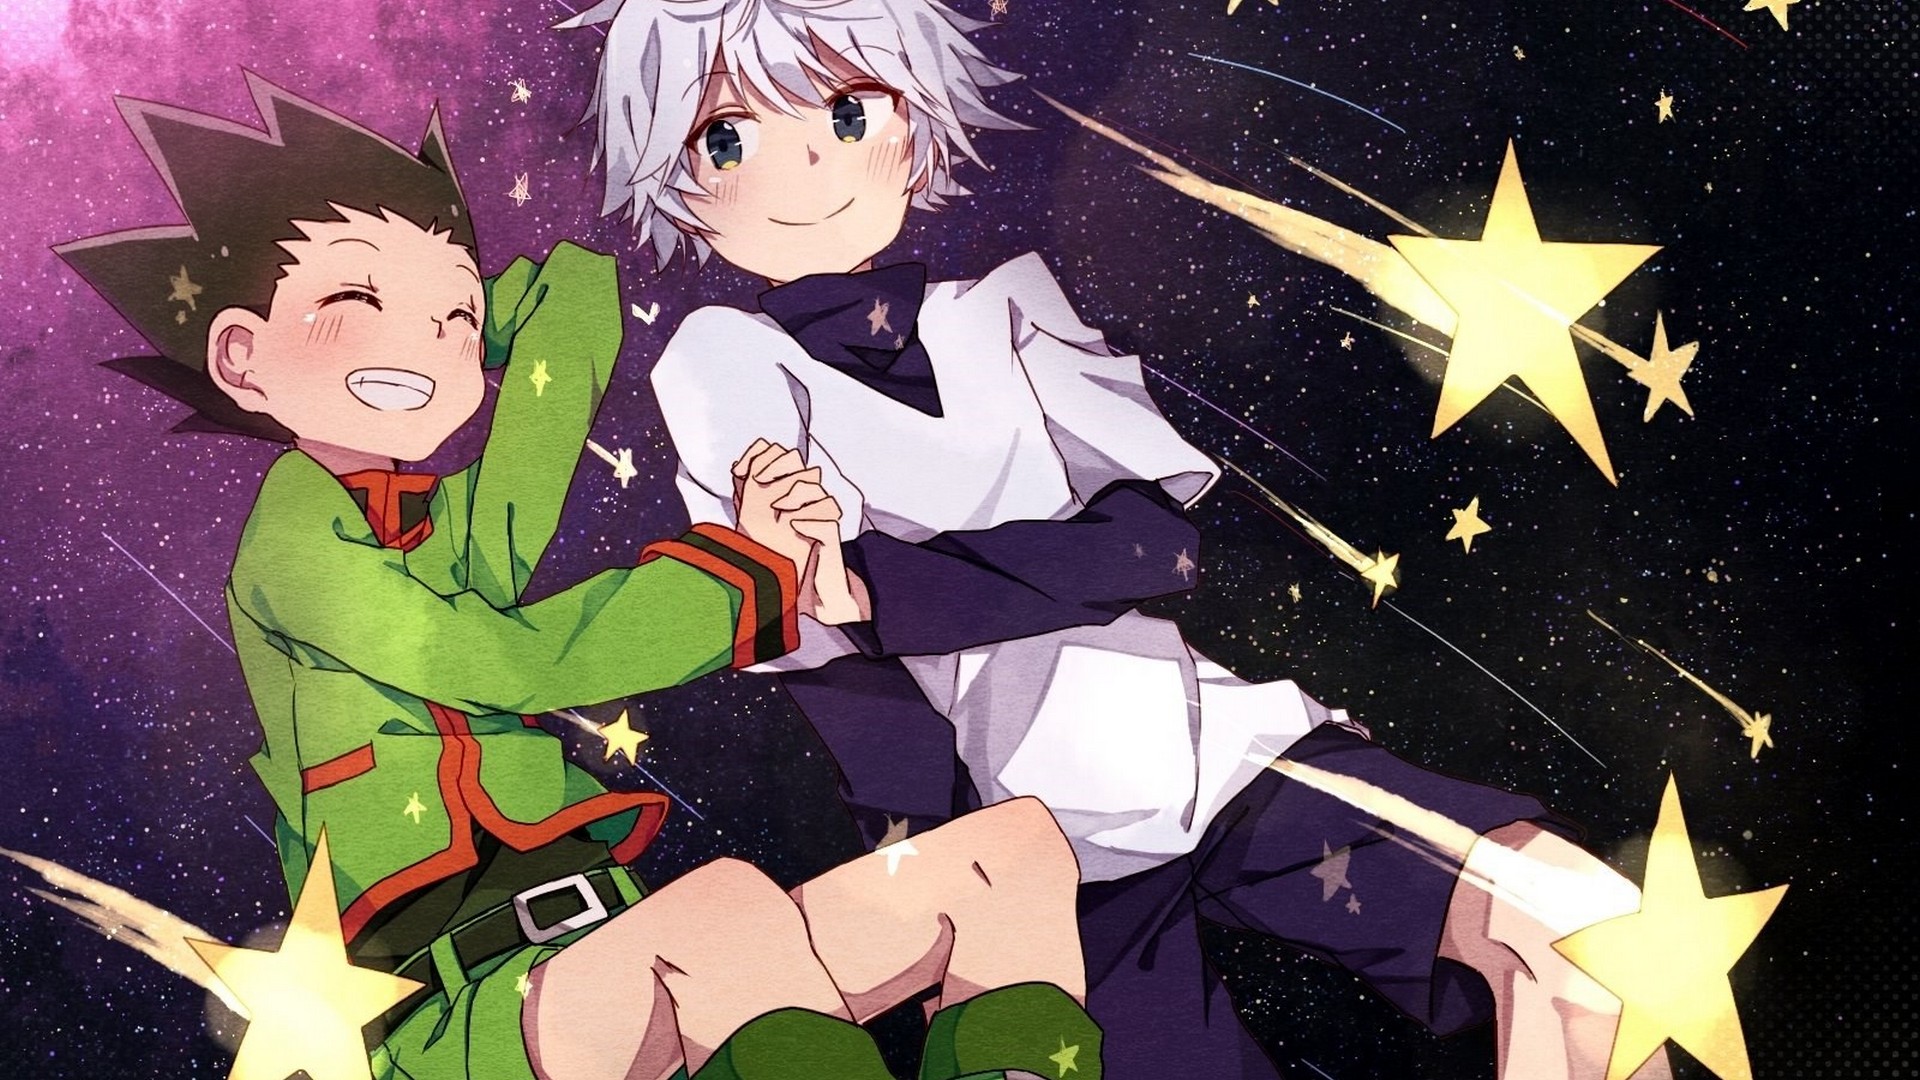 Wallpaper Gon And Killua With high-resolution 1920X1080 pixel. You can use this wallpaper for your Windows and Mac OS computers as well as your Android and iPhone smartphones